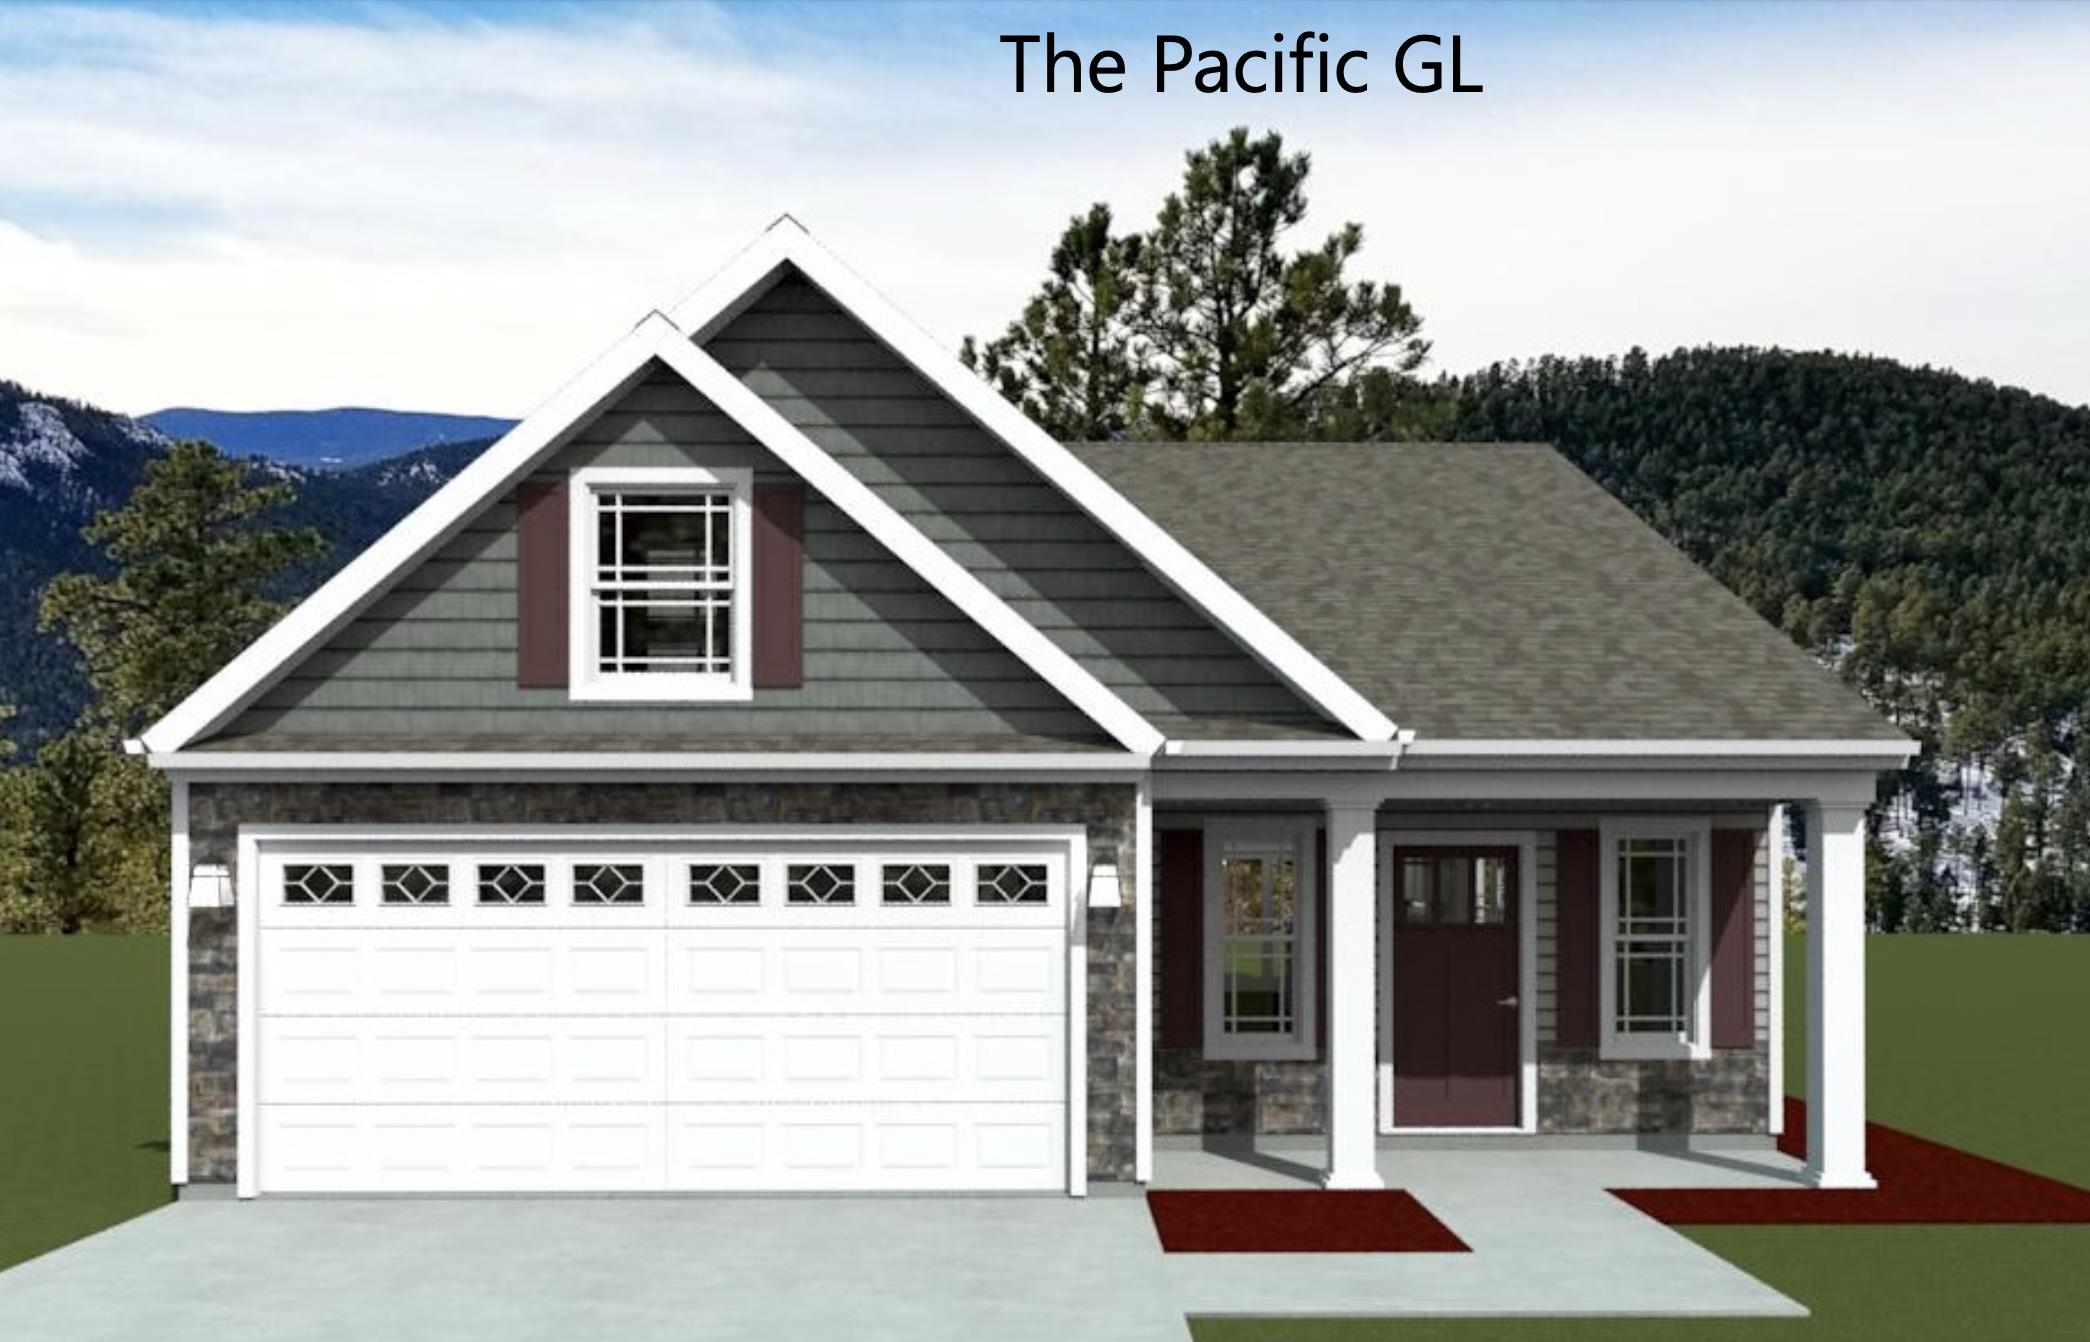 The PACIFIC (Lot 6) offers a modern, open concept living area perfect for entertaining.  3 bedroom, 2 bath. Complete with the trademark chair rail, crown molding, and rope lighting.  12' x 12' covered back patio with additional 10' x 12' uncovered concrete patio.   Upgraded Cabinets.  30-year architectural shingles, site-built construction, and a 10 year limited warranty are included to give you peace of mind.  Preferred Lender/Attorney Closing Costs Incentive Offered!